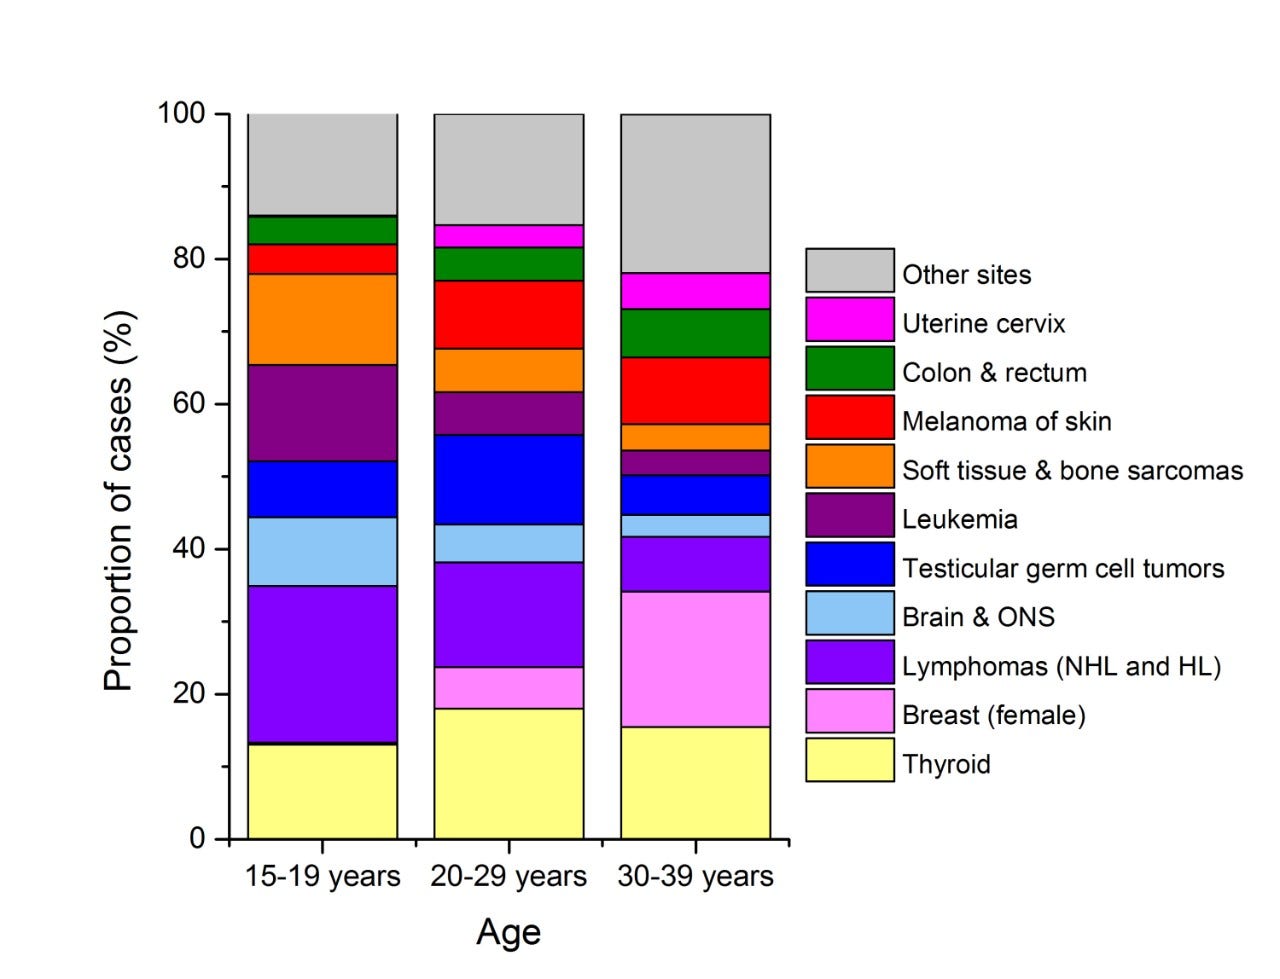 colorful bar graph for 3 age groups 15-39